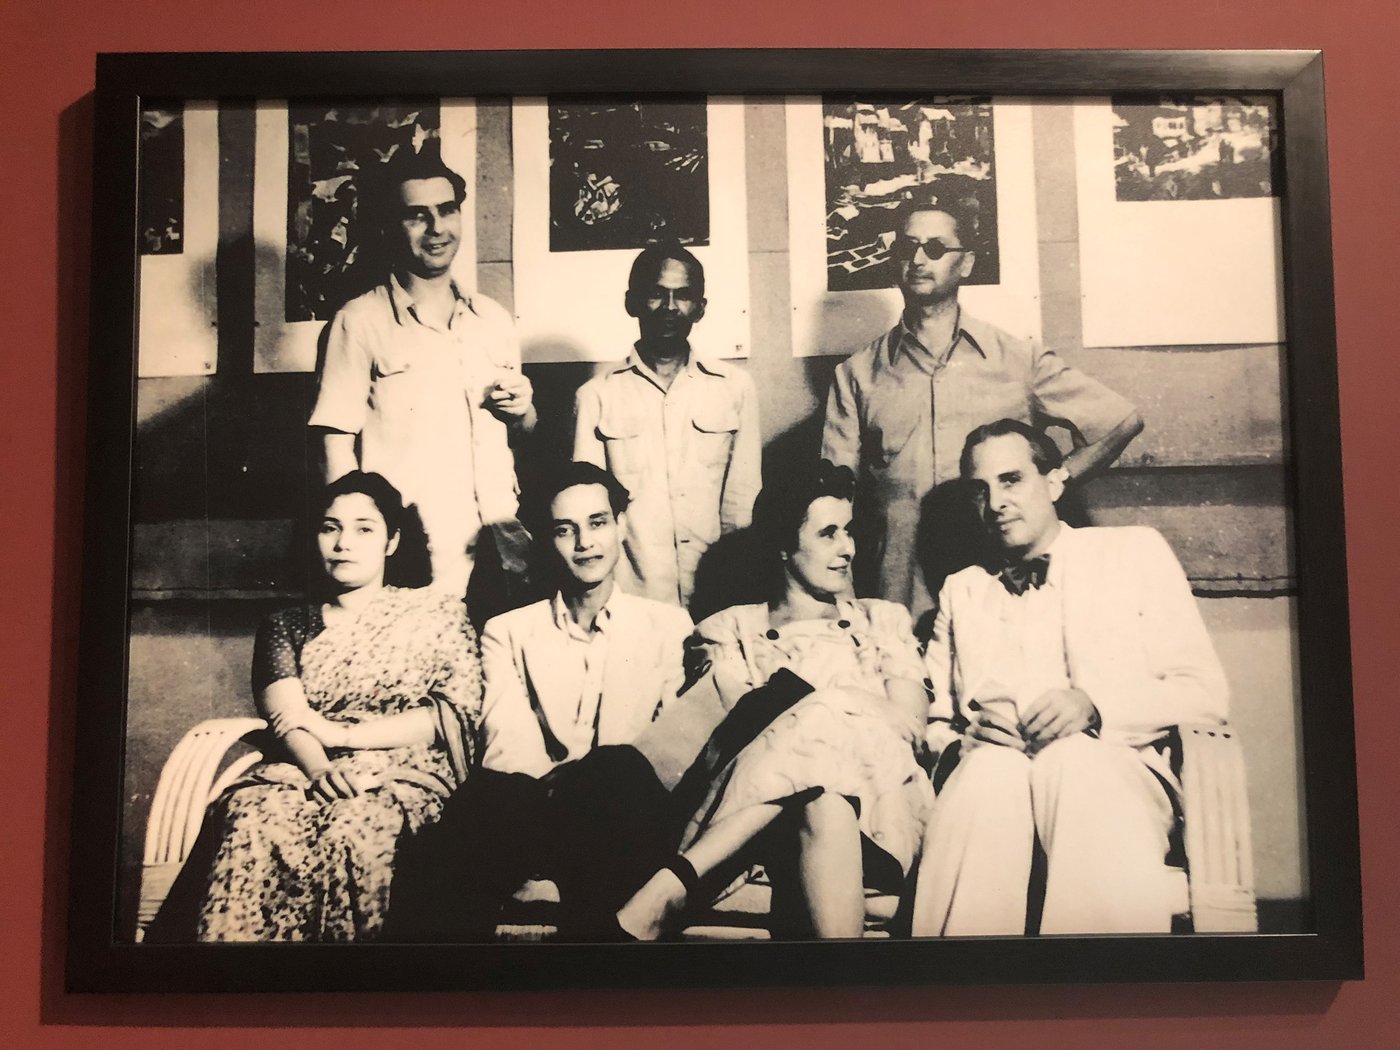 The black-and-white photograph shows a group of artists lined up in front of a row of graphic-art works. Sitting on a rattan bench in the foreground: unknown woman in a sari, Sayed Haider Raza, and Käthe Langhammer with her husband Rudi von Leyden. Standing behind them Walter Langhammer, K. H. Ara, and Emanuel Schlesinger (wearing sunglasses).